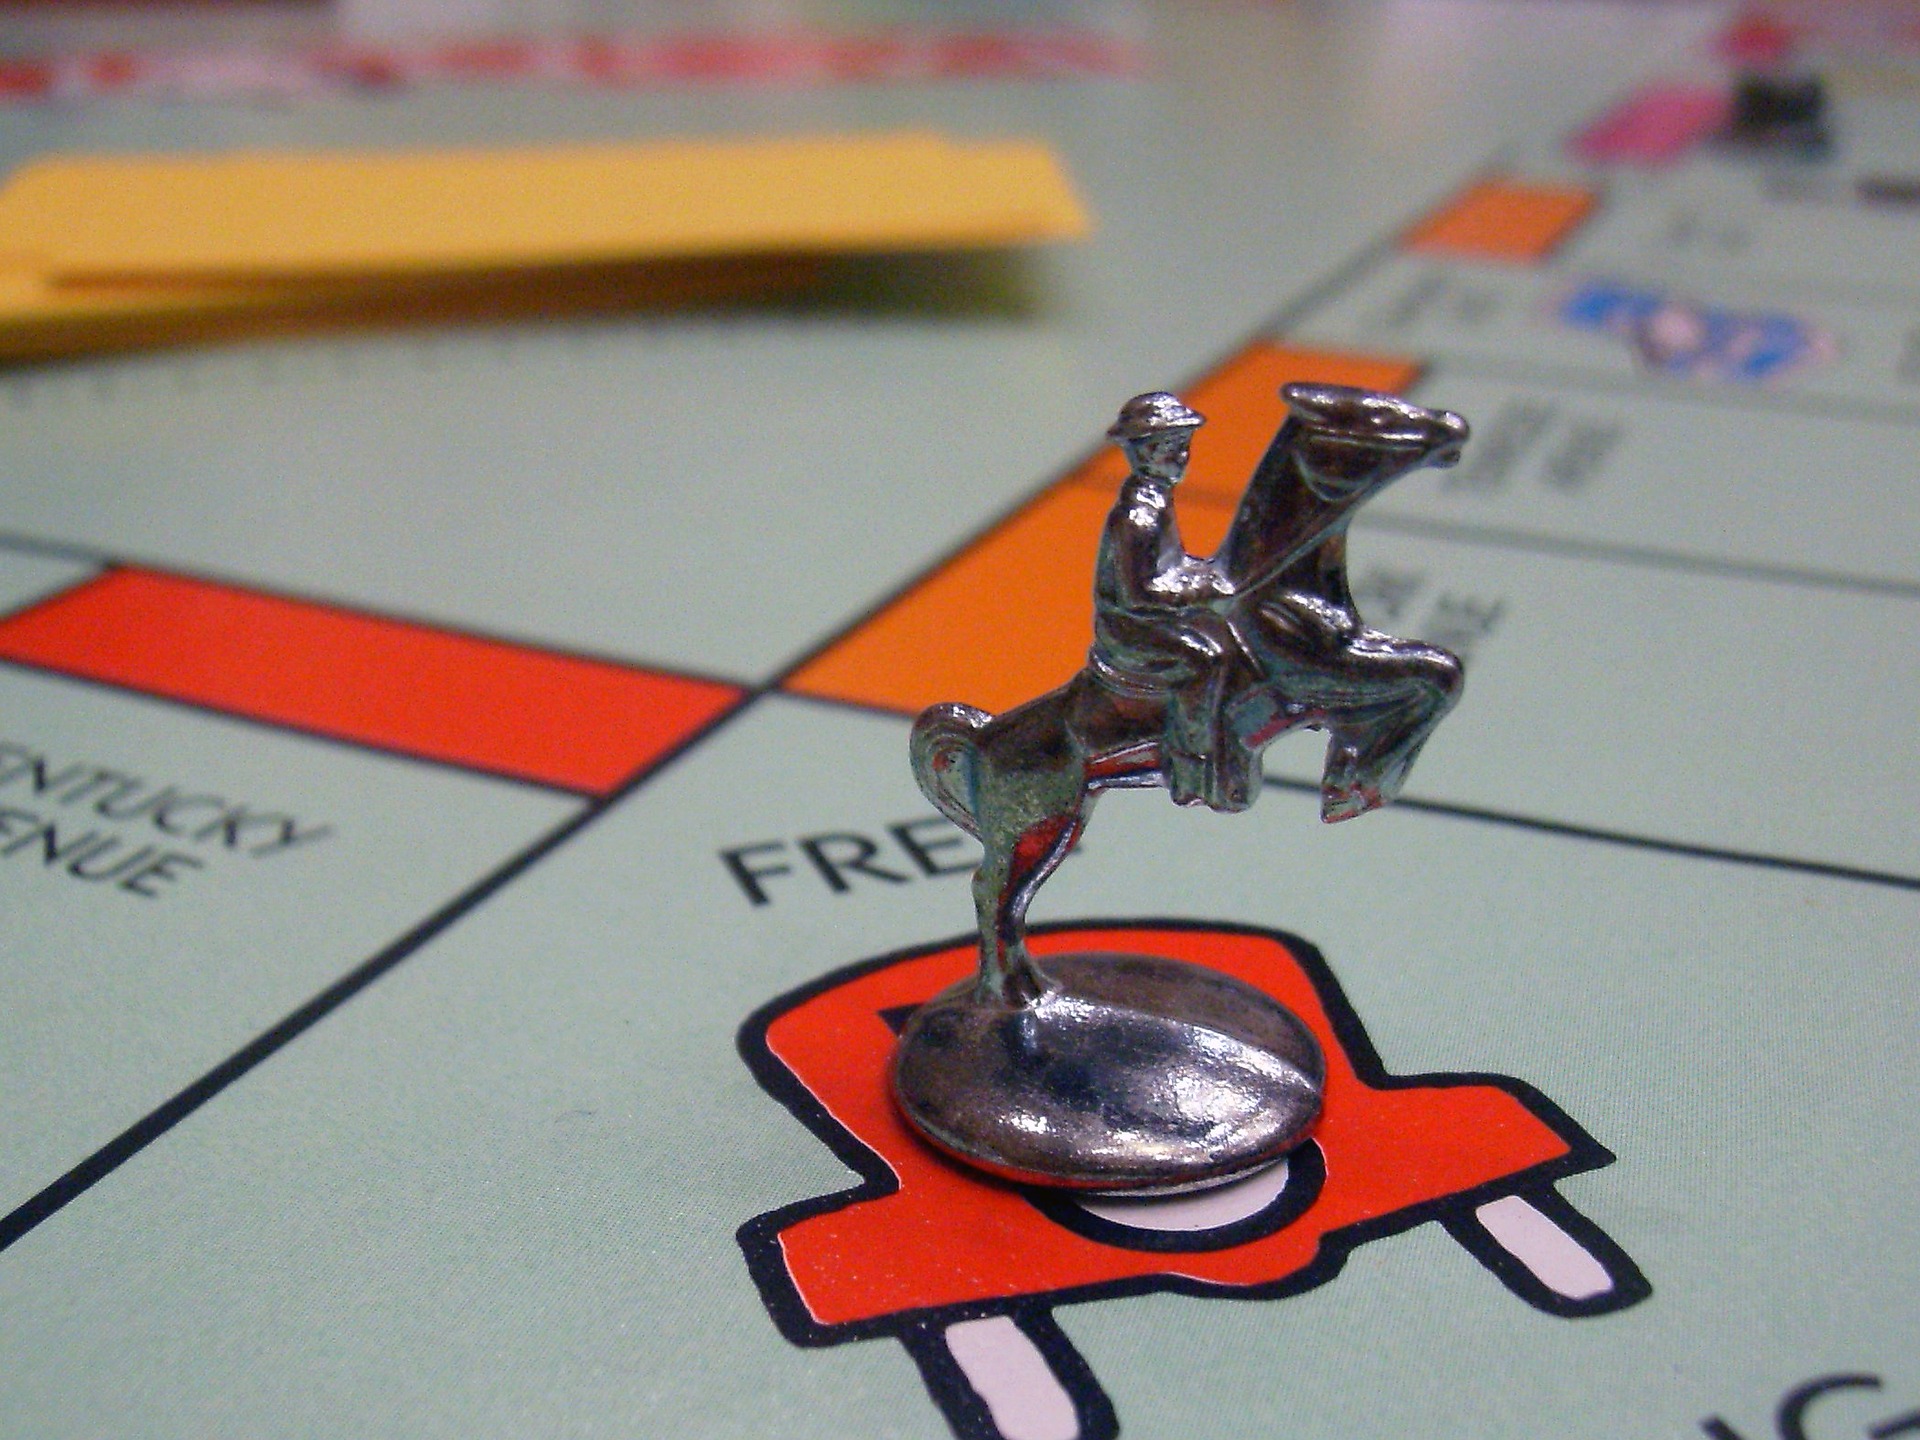 The cowboy riding a horse Monopoly piece on a Monopoly board